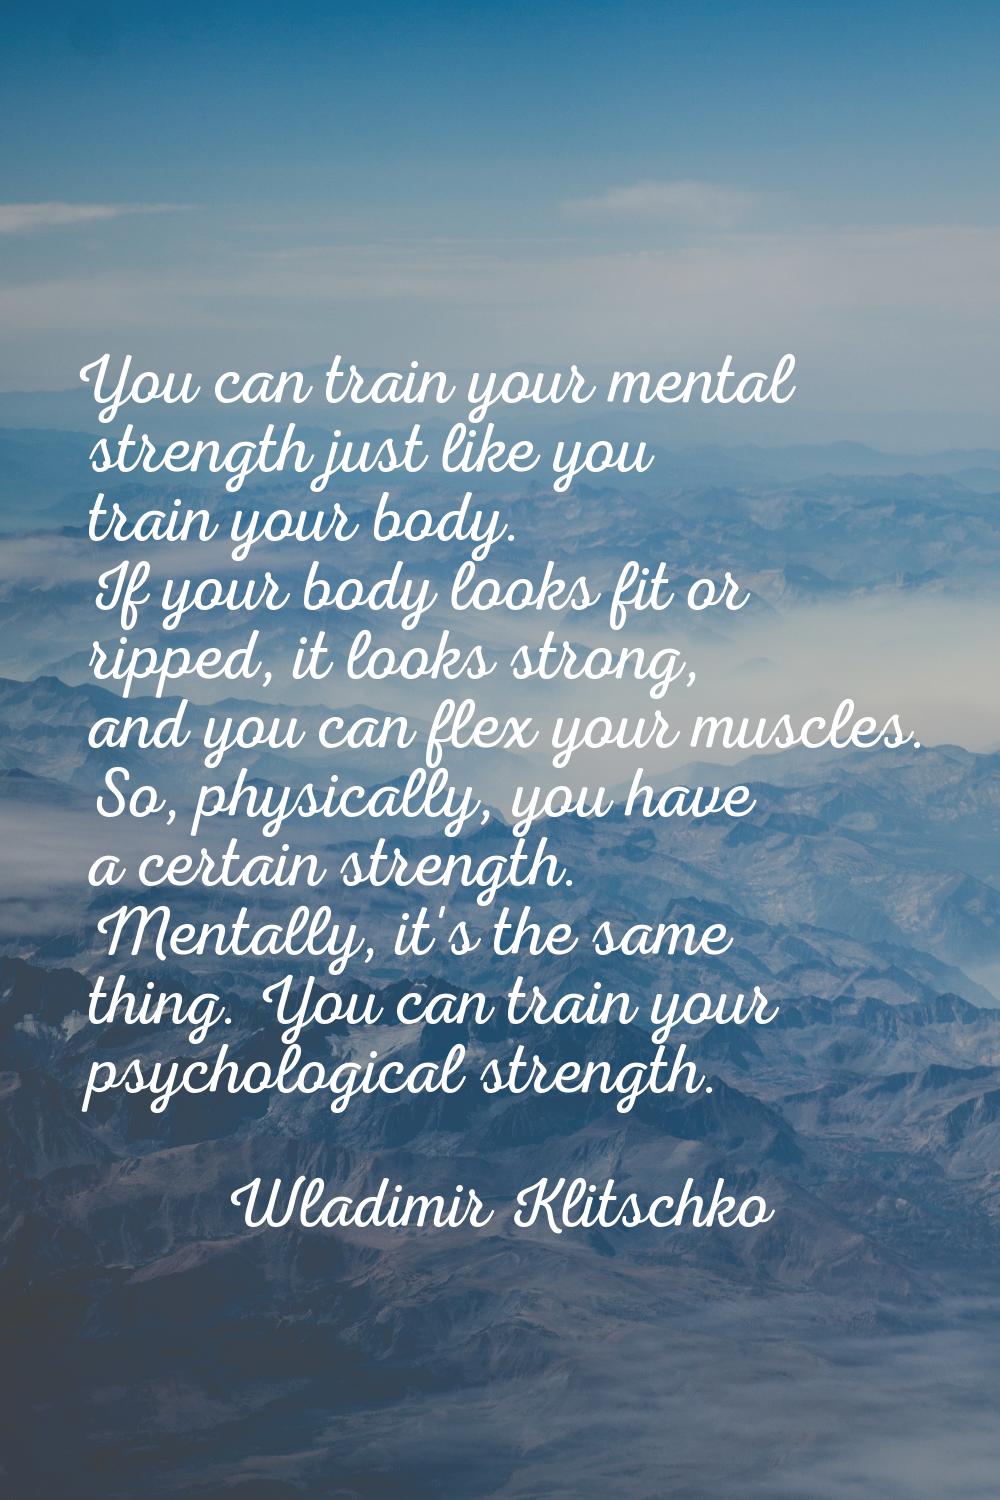 You can train your mental strength just like you train your body. If your body looks fit or ripped,